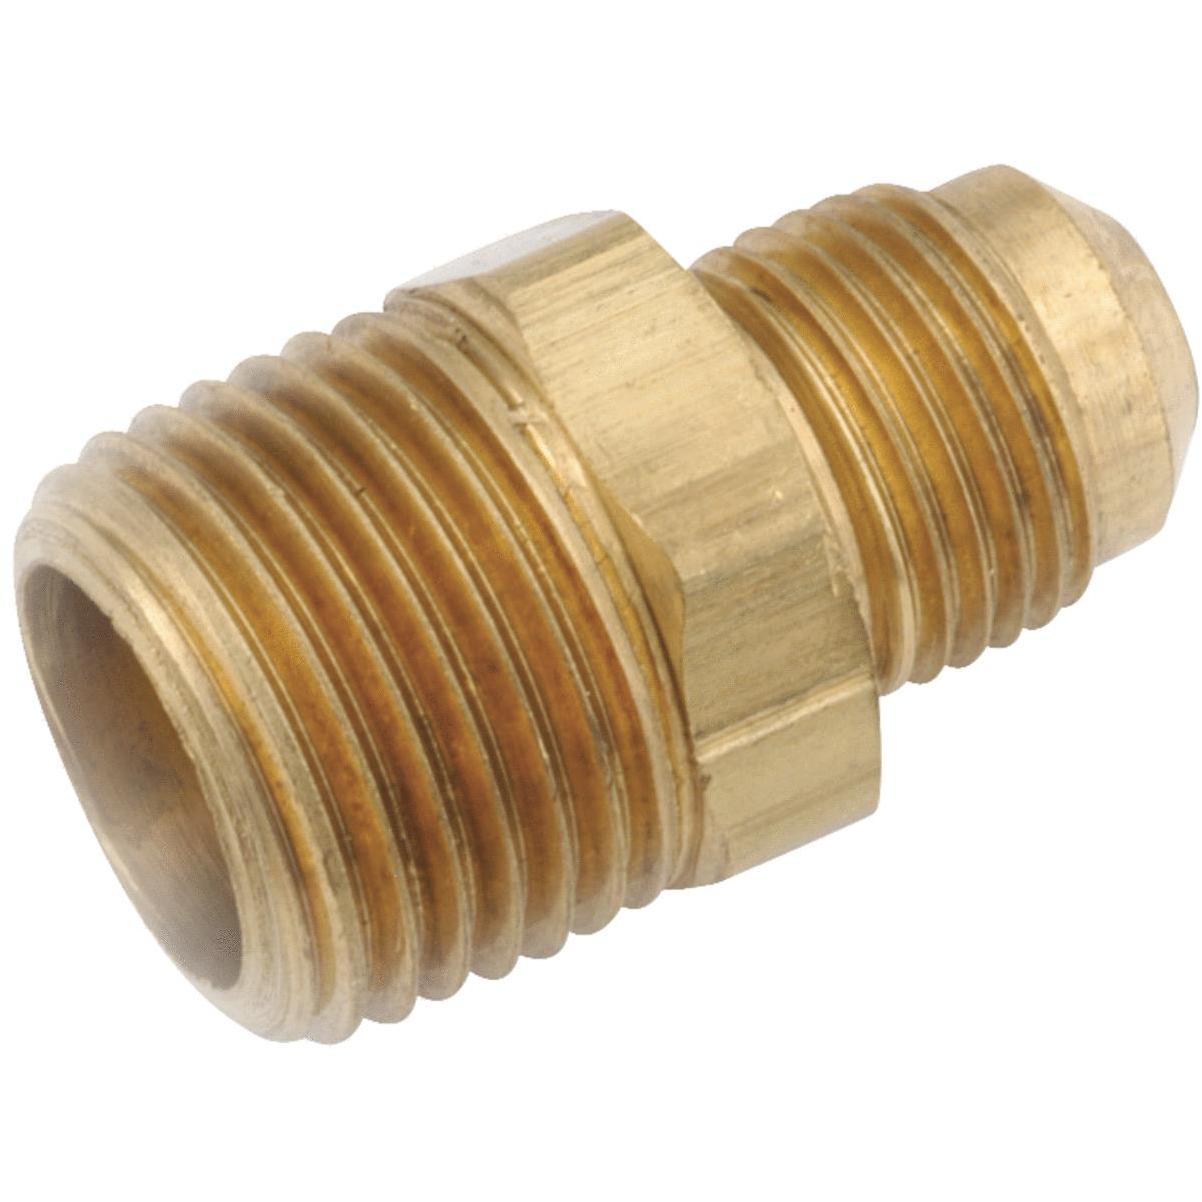 Anderson Metals Brass Hose Fitting Connector 1/4 Barb x 3/8 Male Flare 